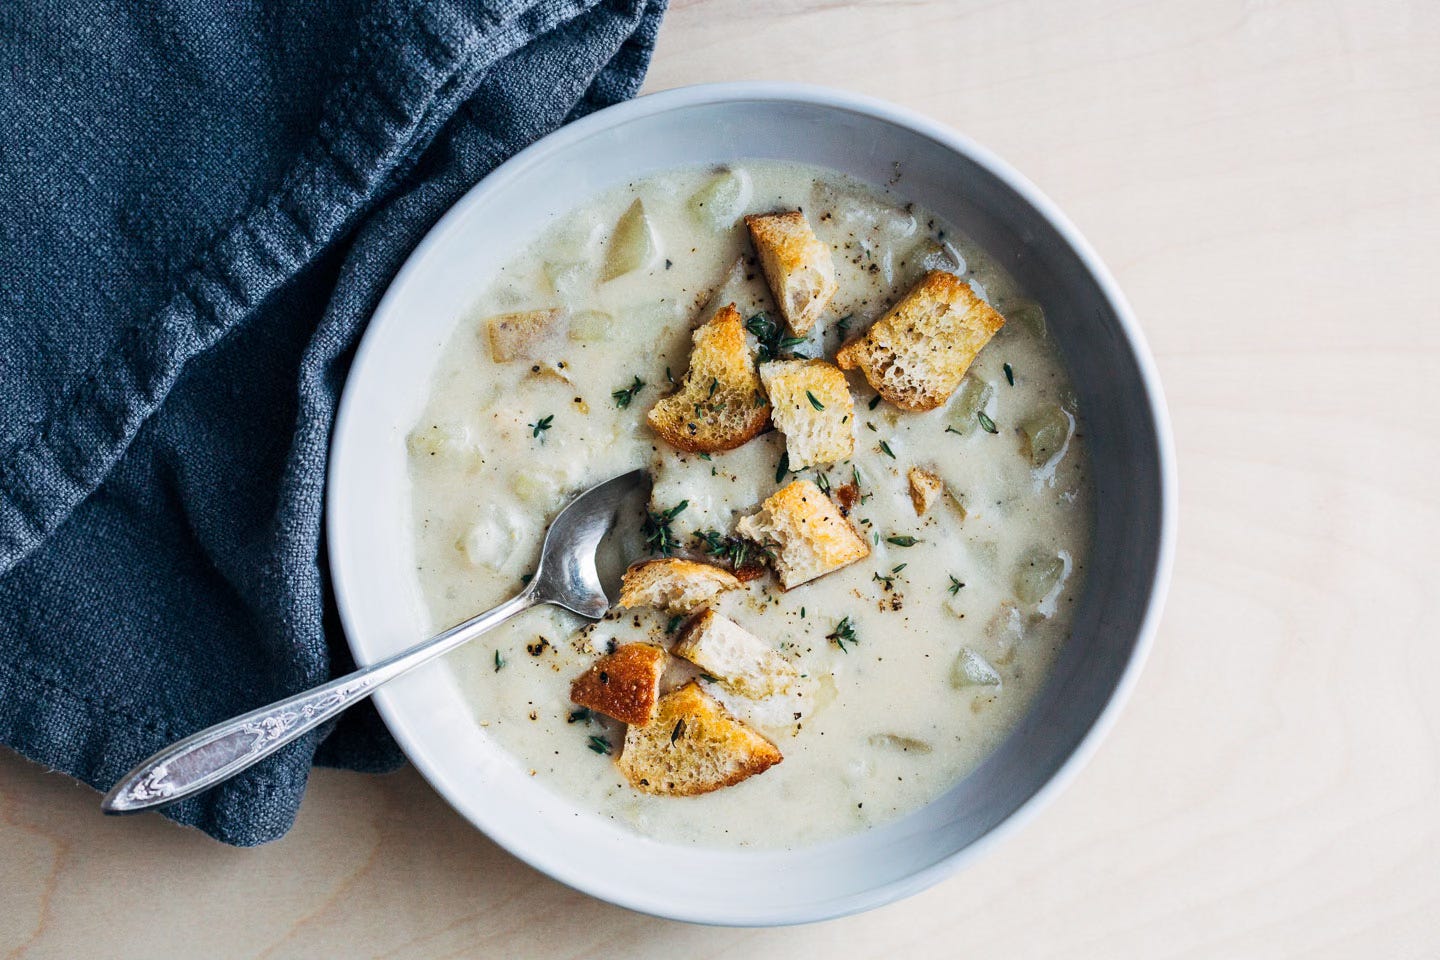 A bowl of potato soup with croutons and herbs. A spoon rests in the soup.